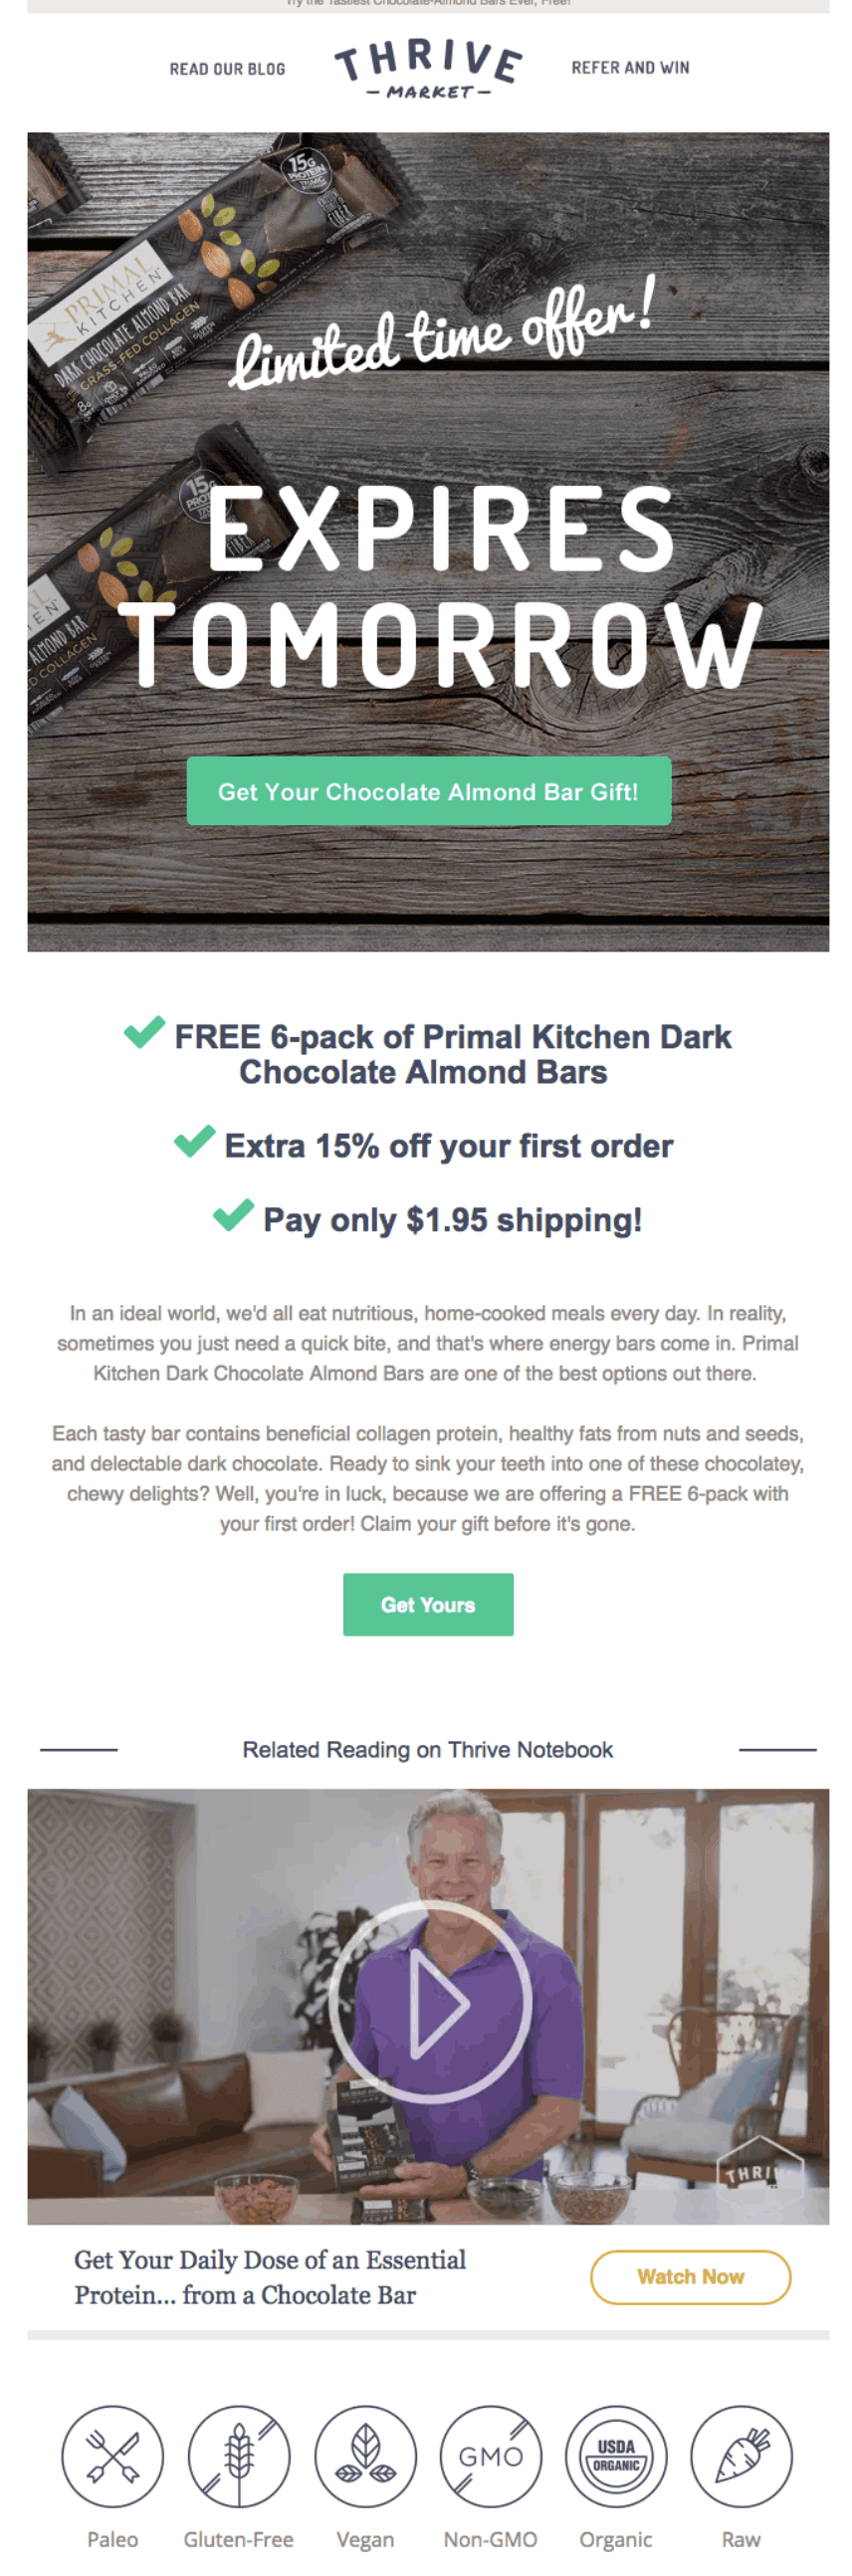 Retail sales promotion email 